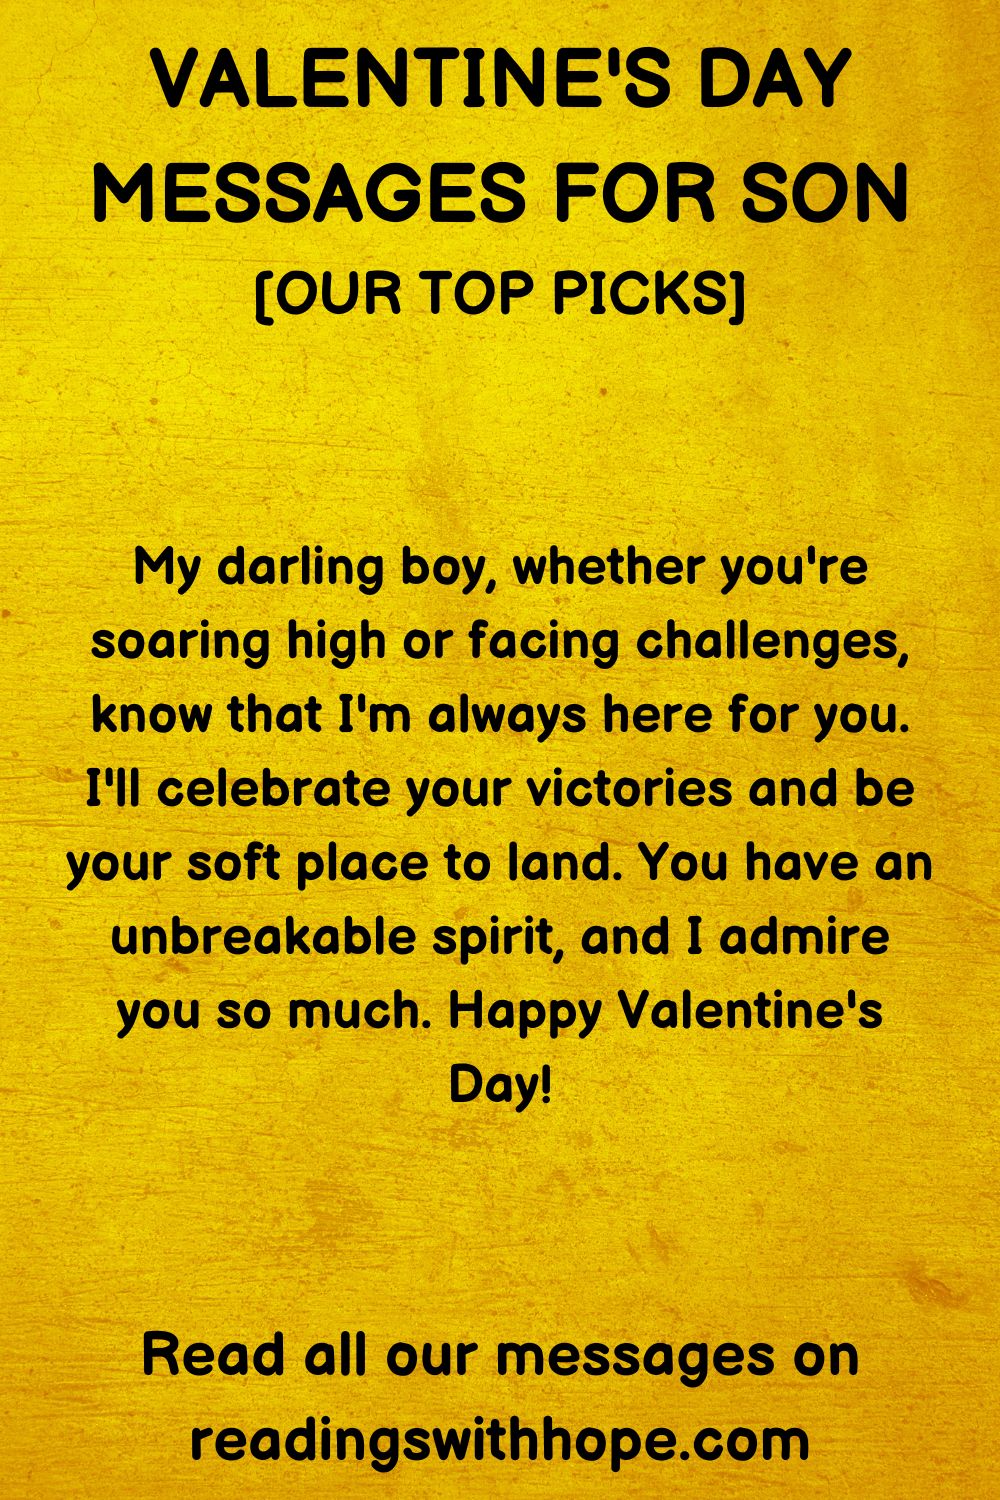 45 Valentine's Day Messages for Your Son